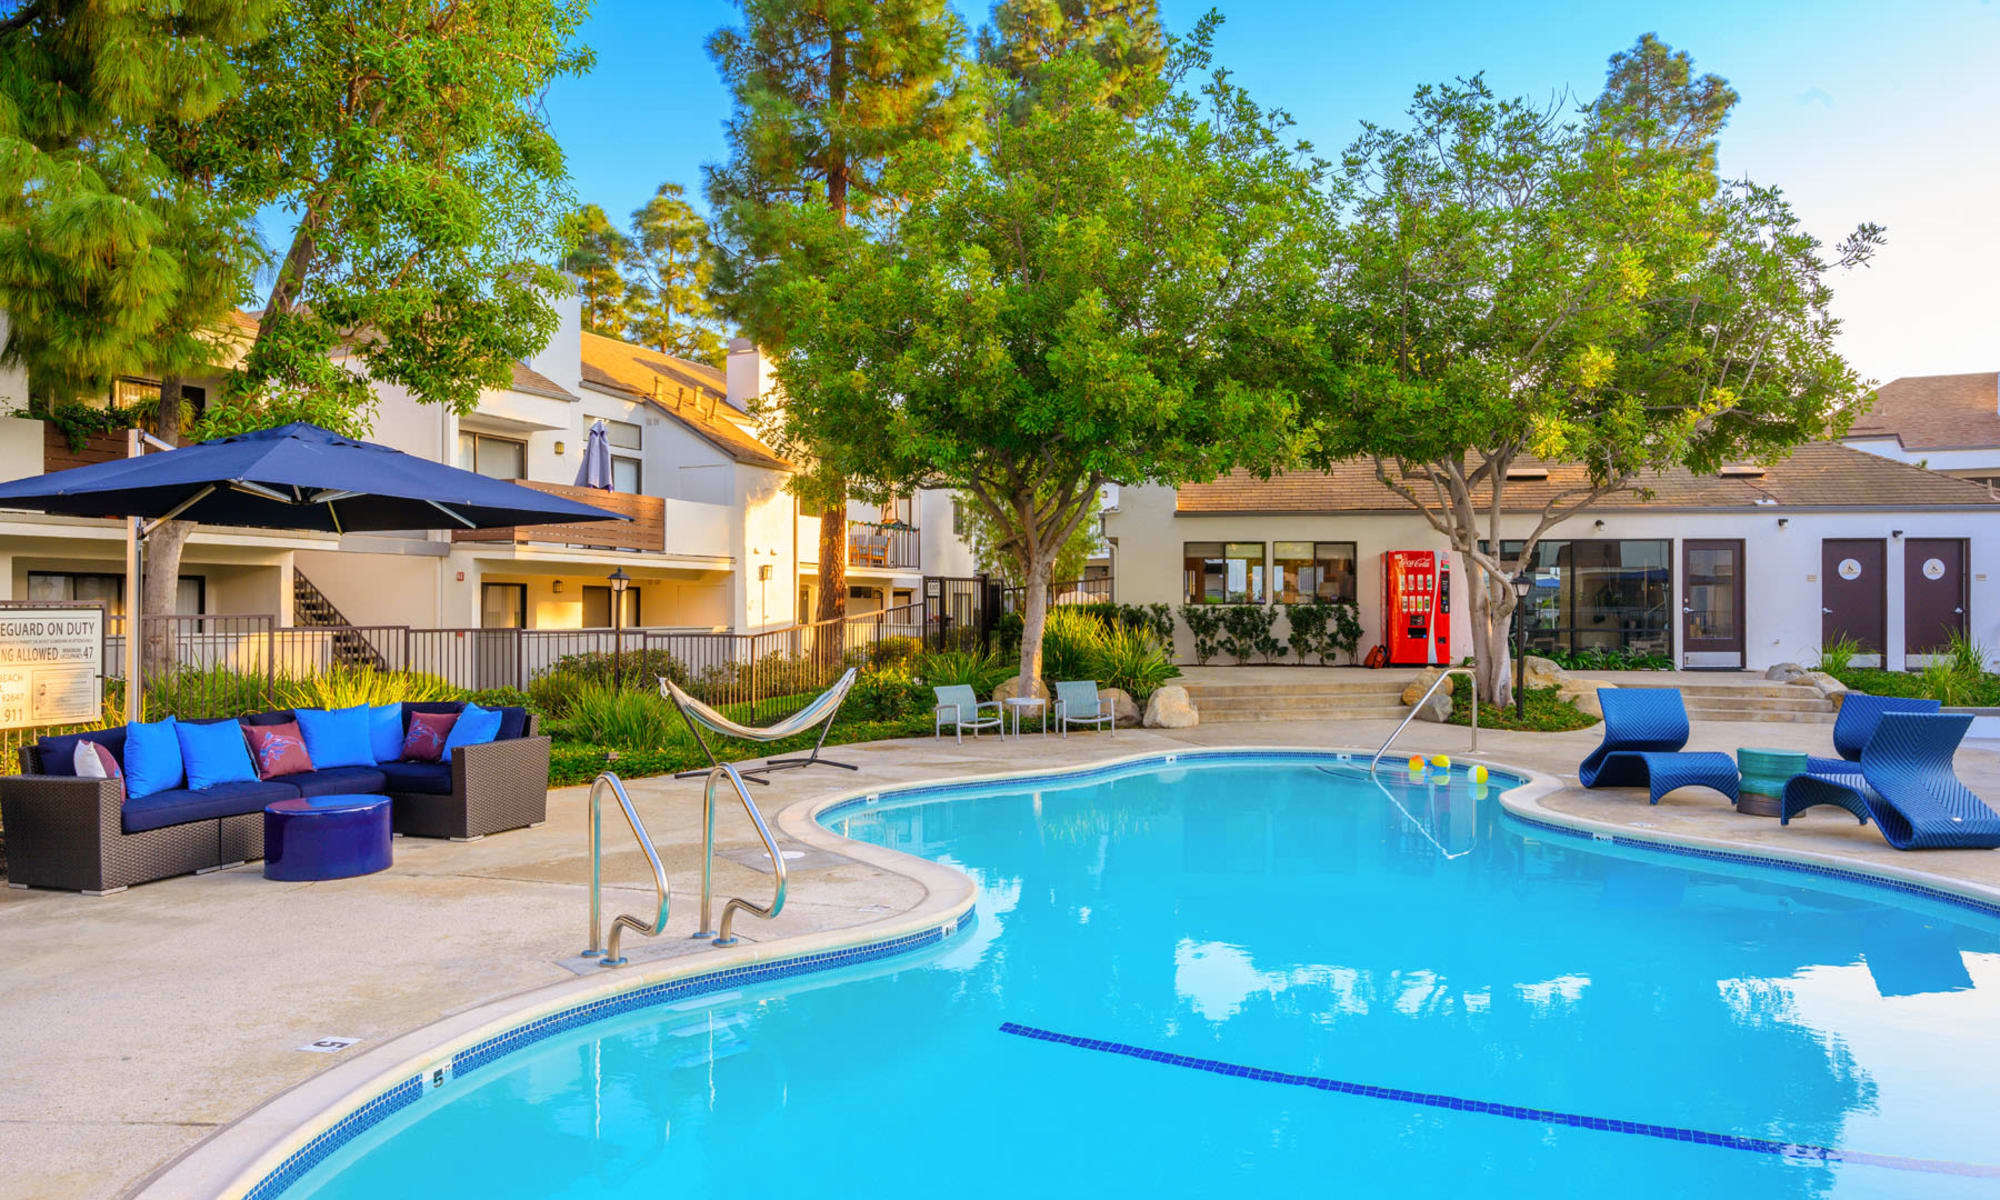 Shaded lounge areas near the swimming pool surrounded by mature trees at Pleasanton Place Apartment Homes in Pleasanton, California